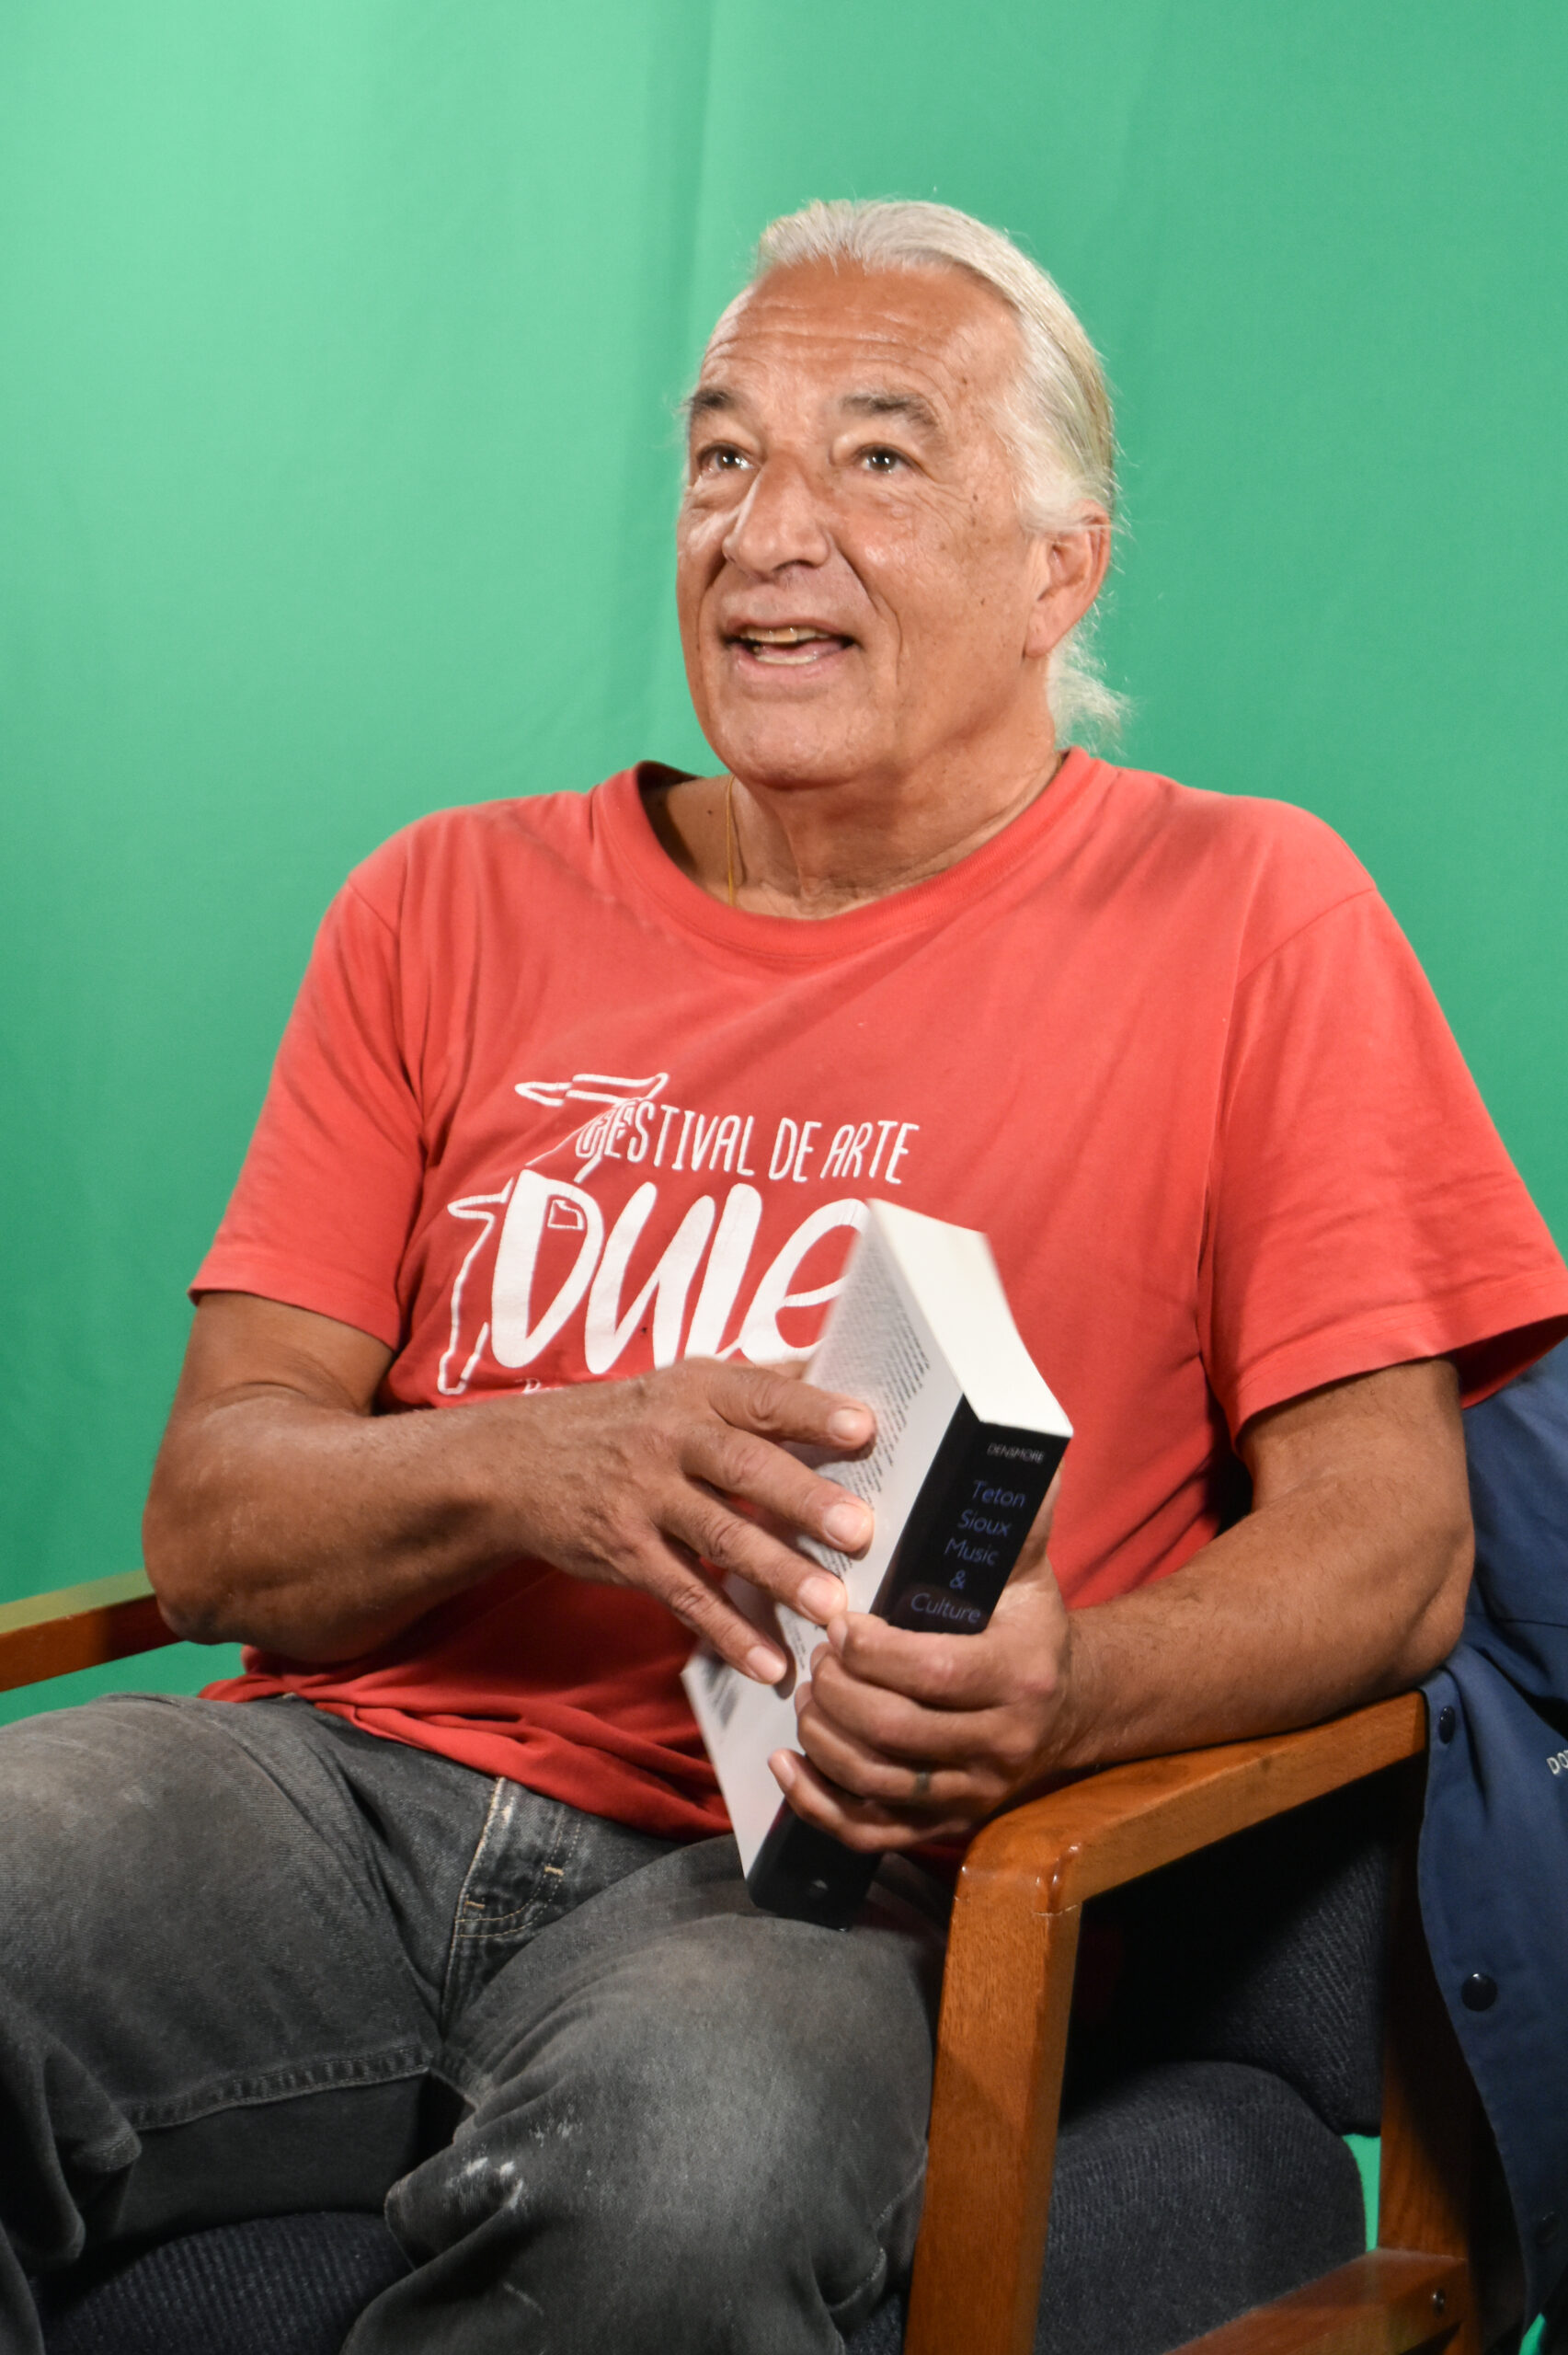 A Lakota man with white hair, wearing a red T-shirt and black jeans sitting on a wooden armchair. He is holding a thick book while captured in this photo mid-sentence.